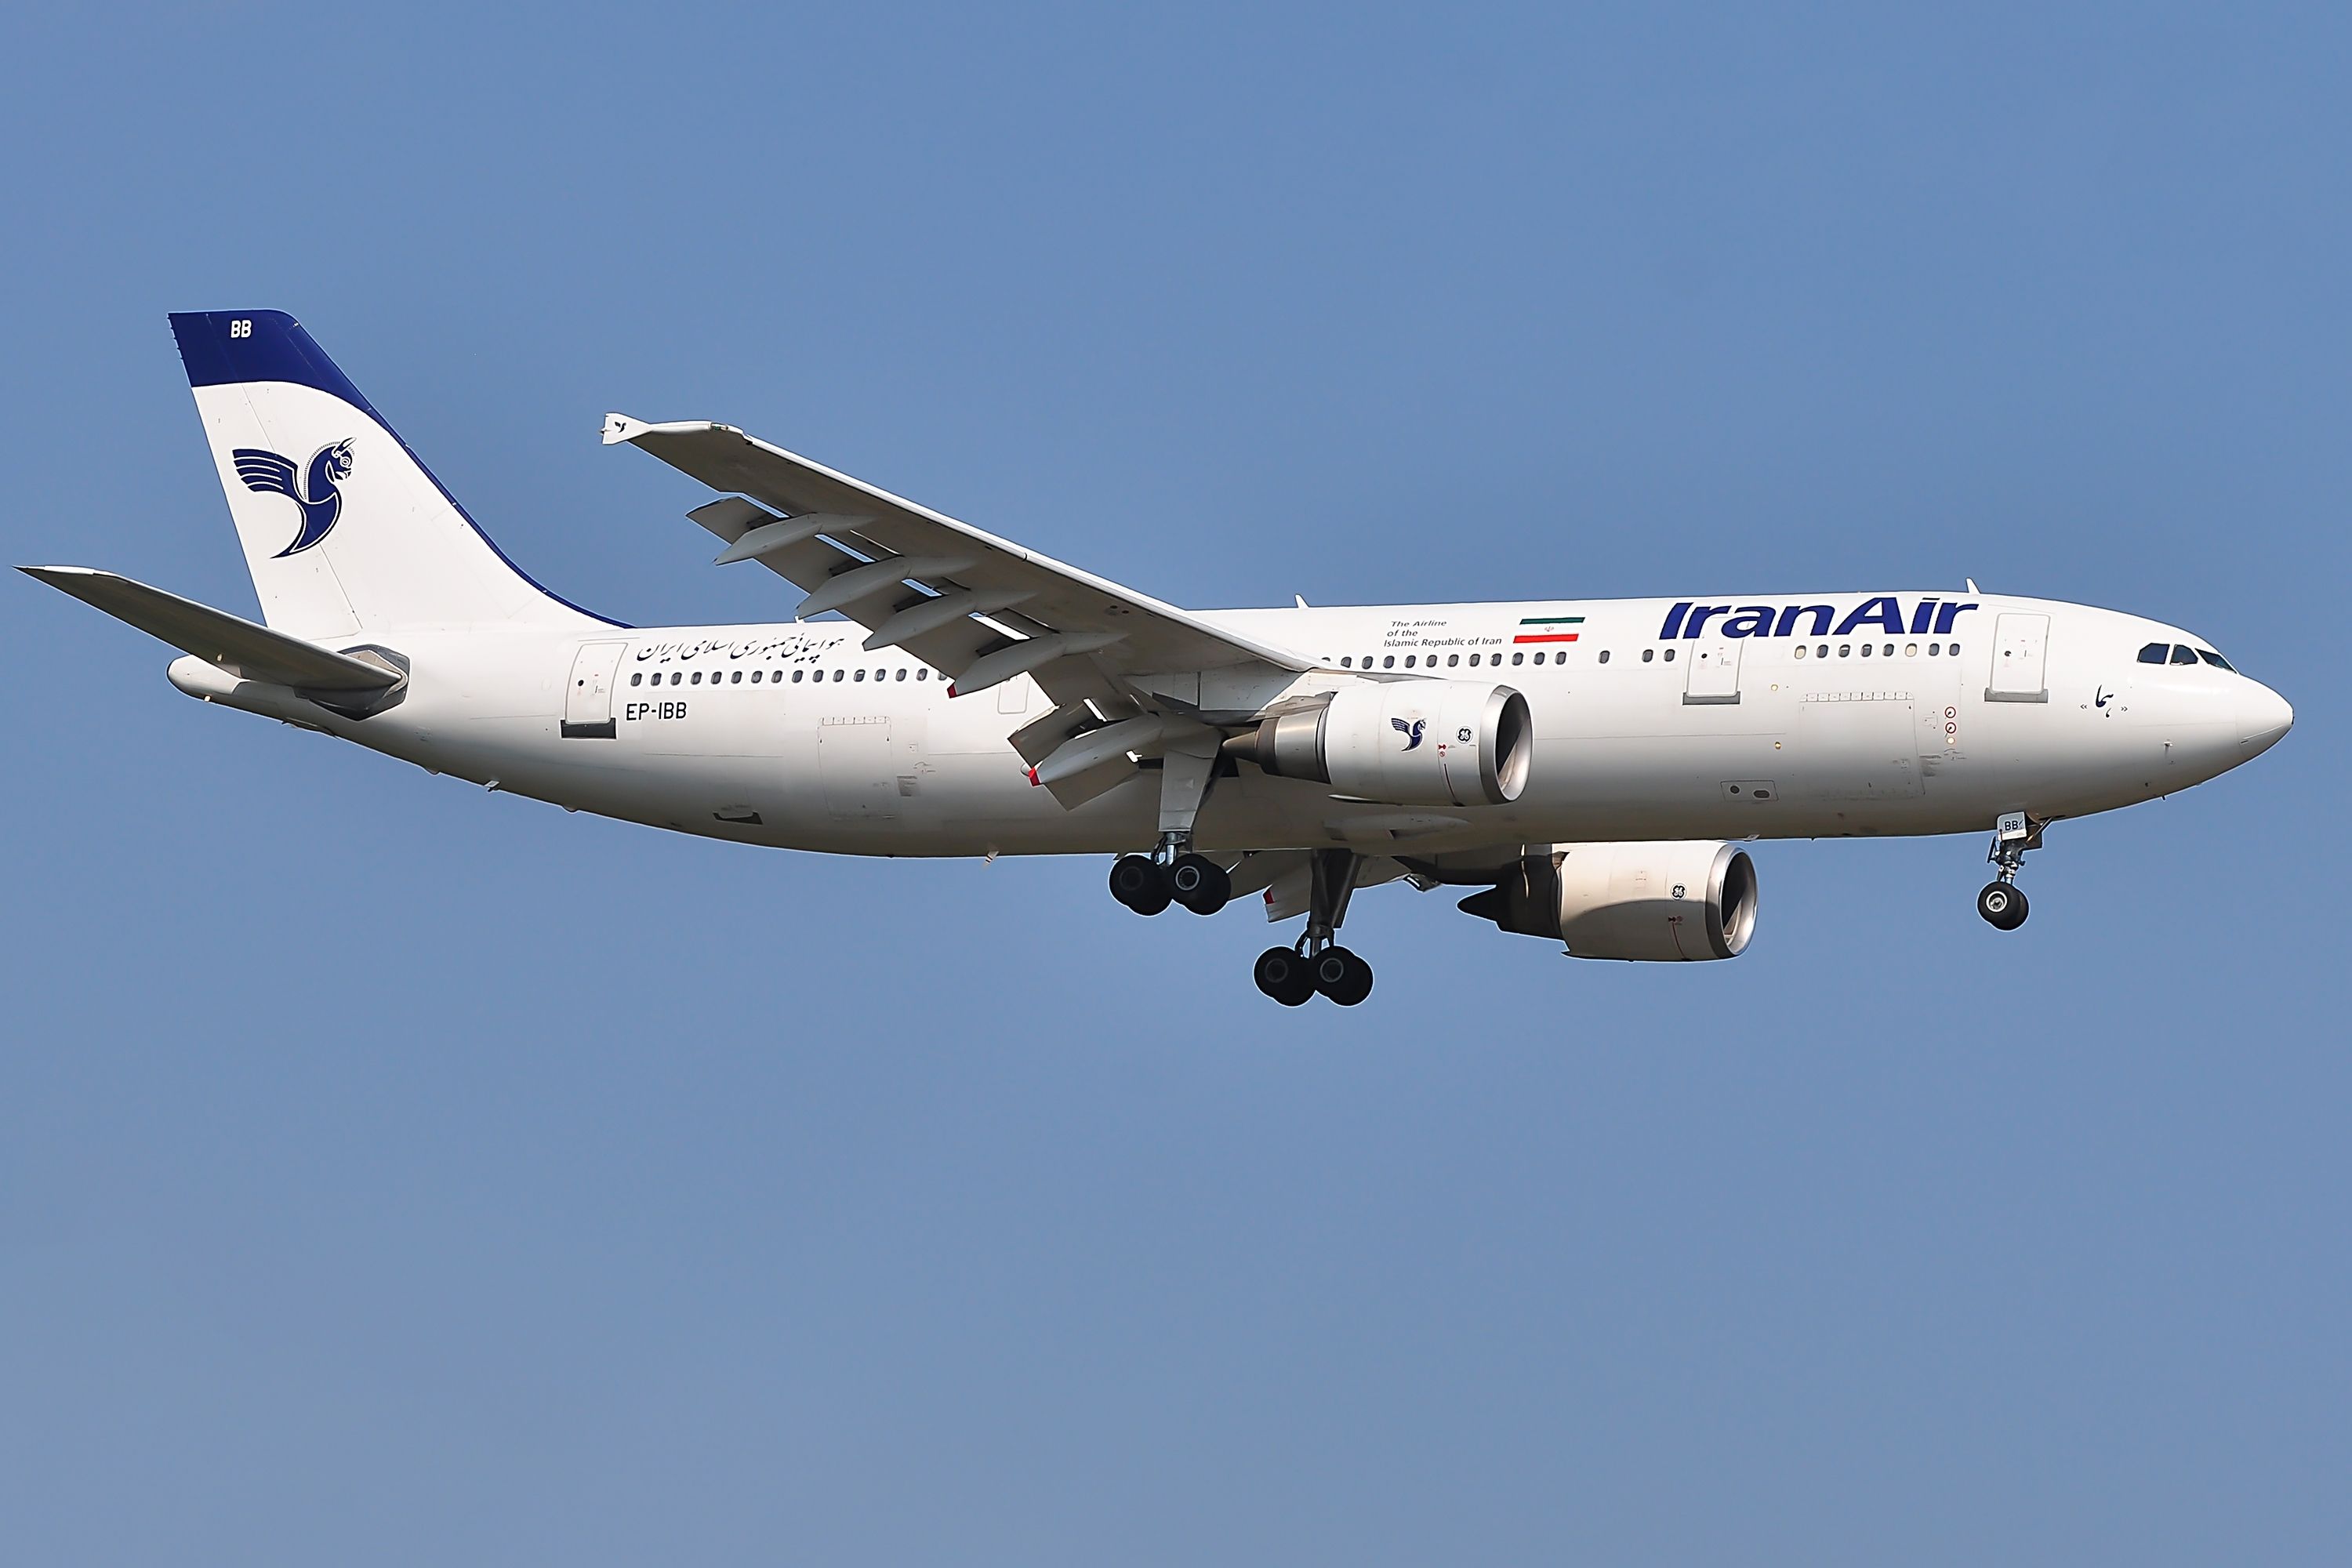 An IranAir Airbus A300-600 flying in the sky.